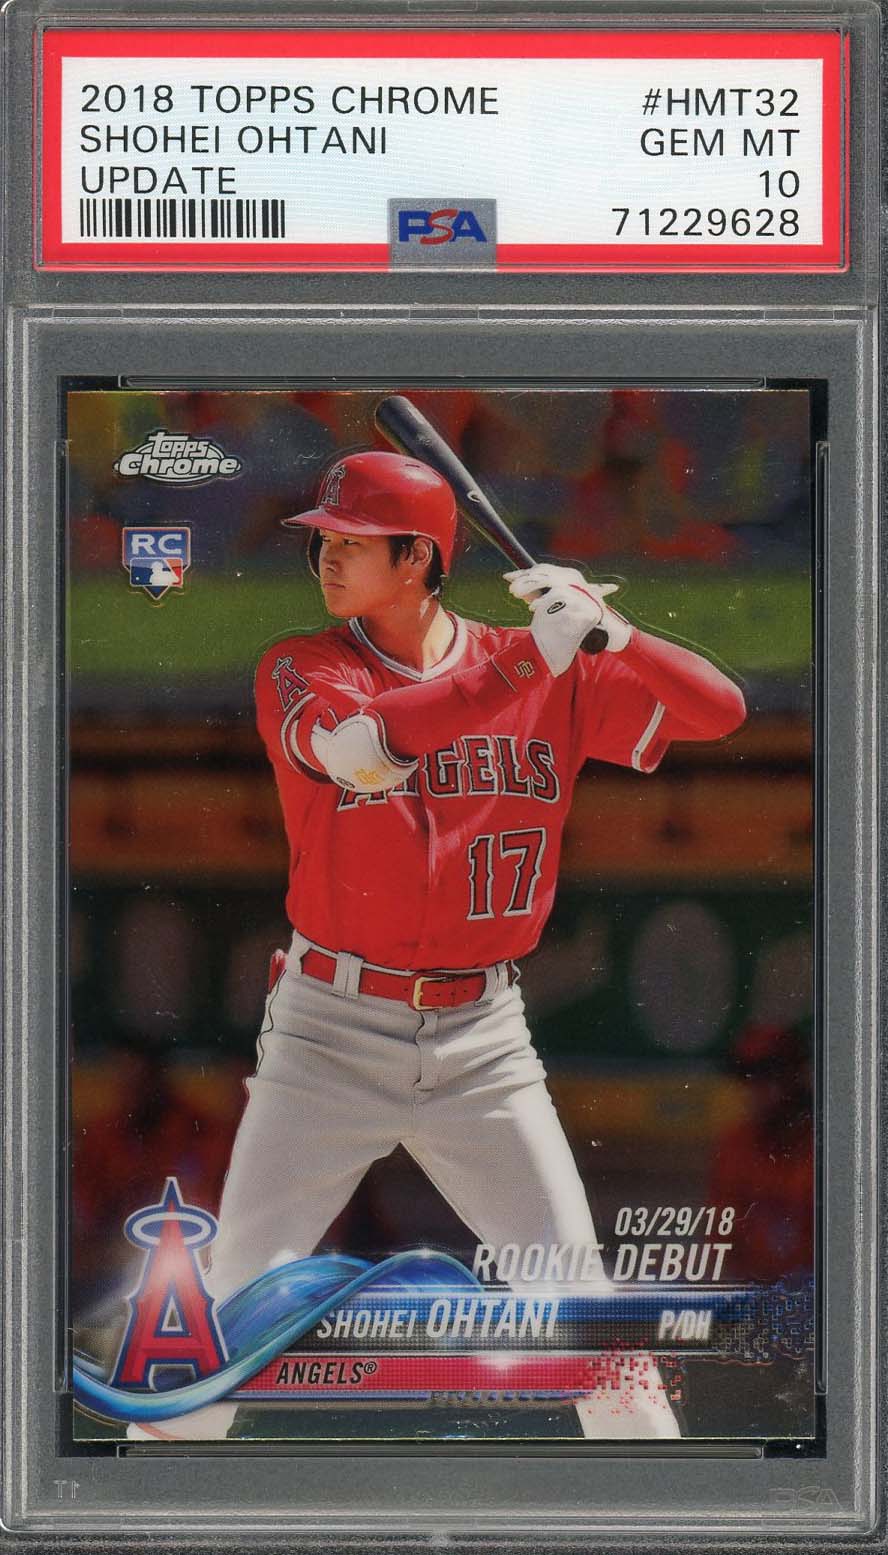 Charitybuzz: Shohei Ohtani PSA 9 Mint Autographed Card, #2 of Only